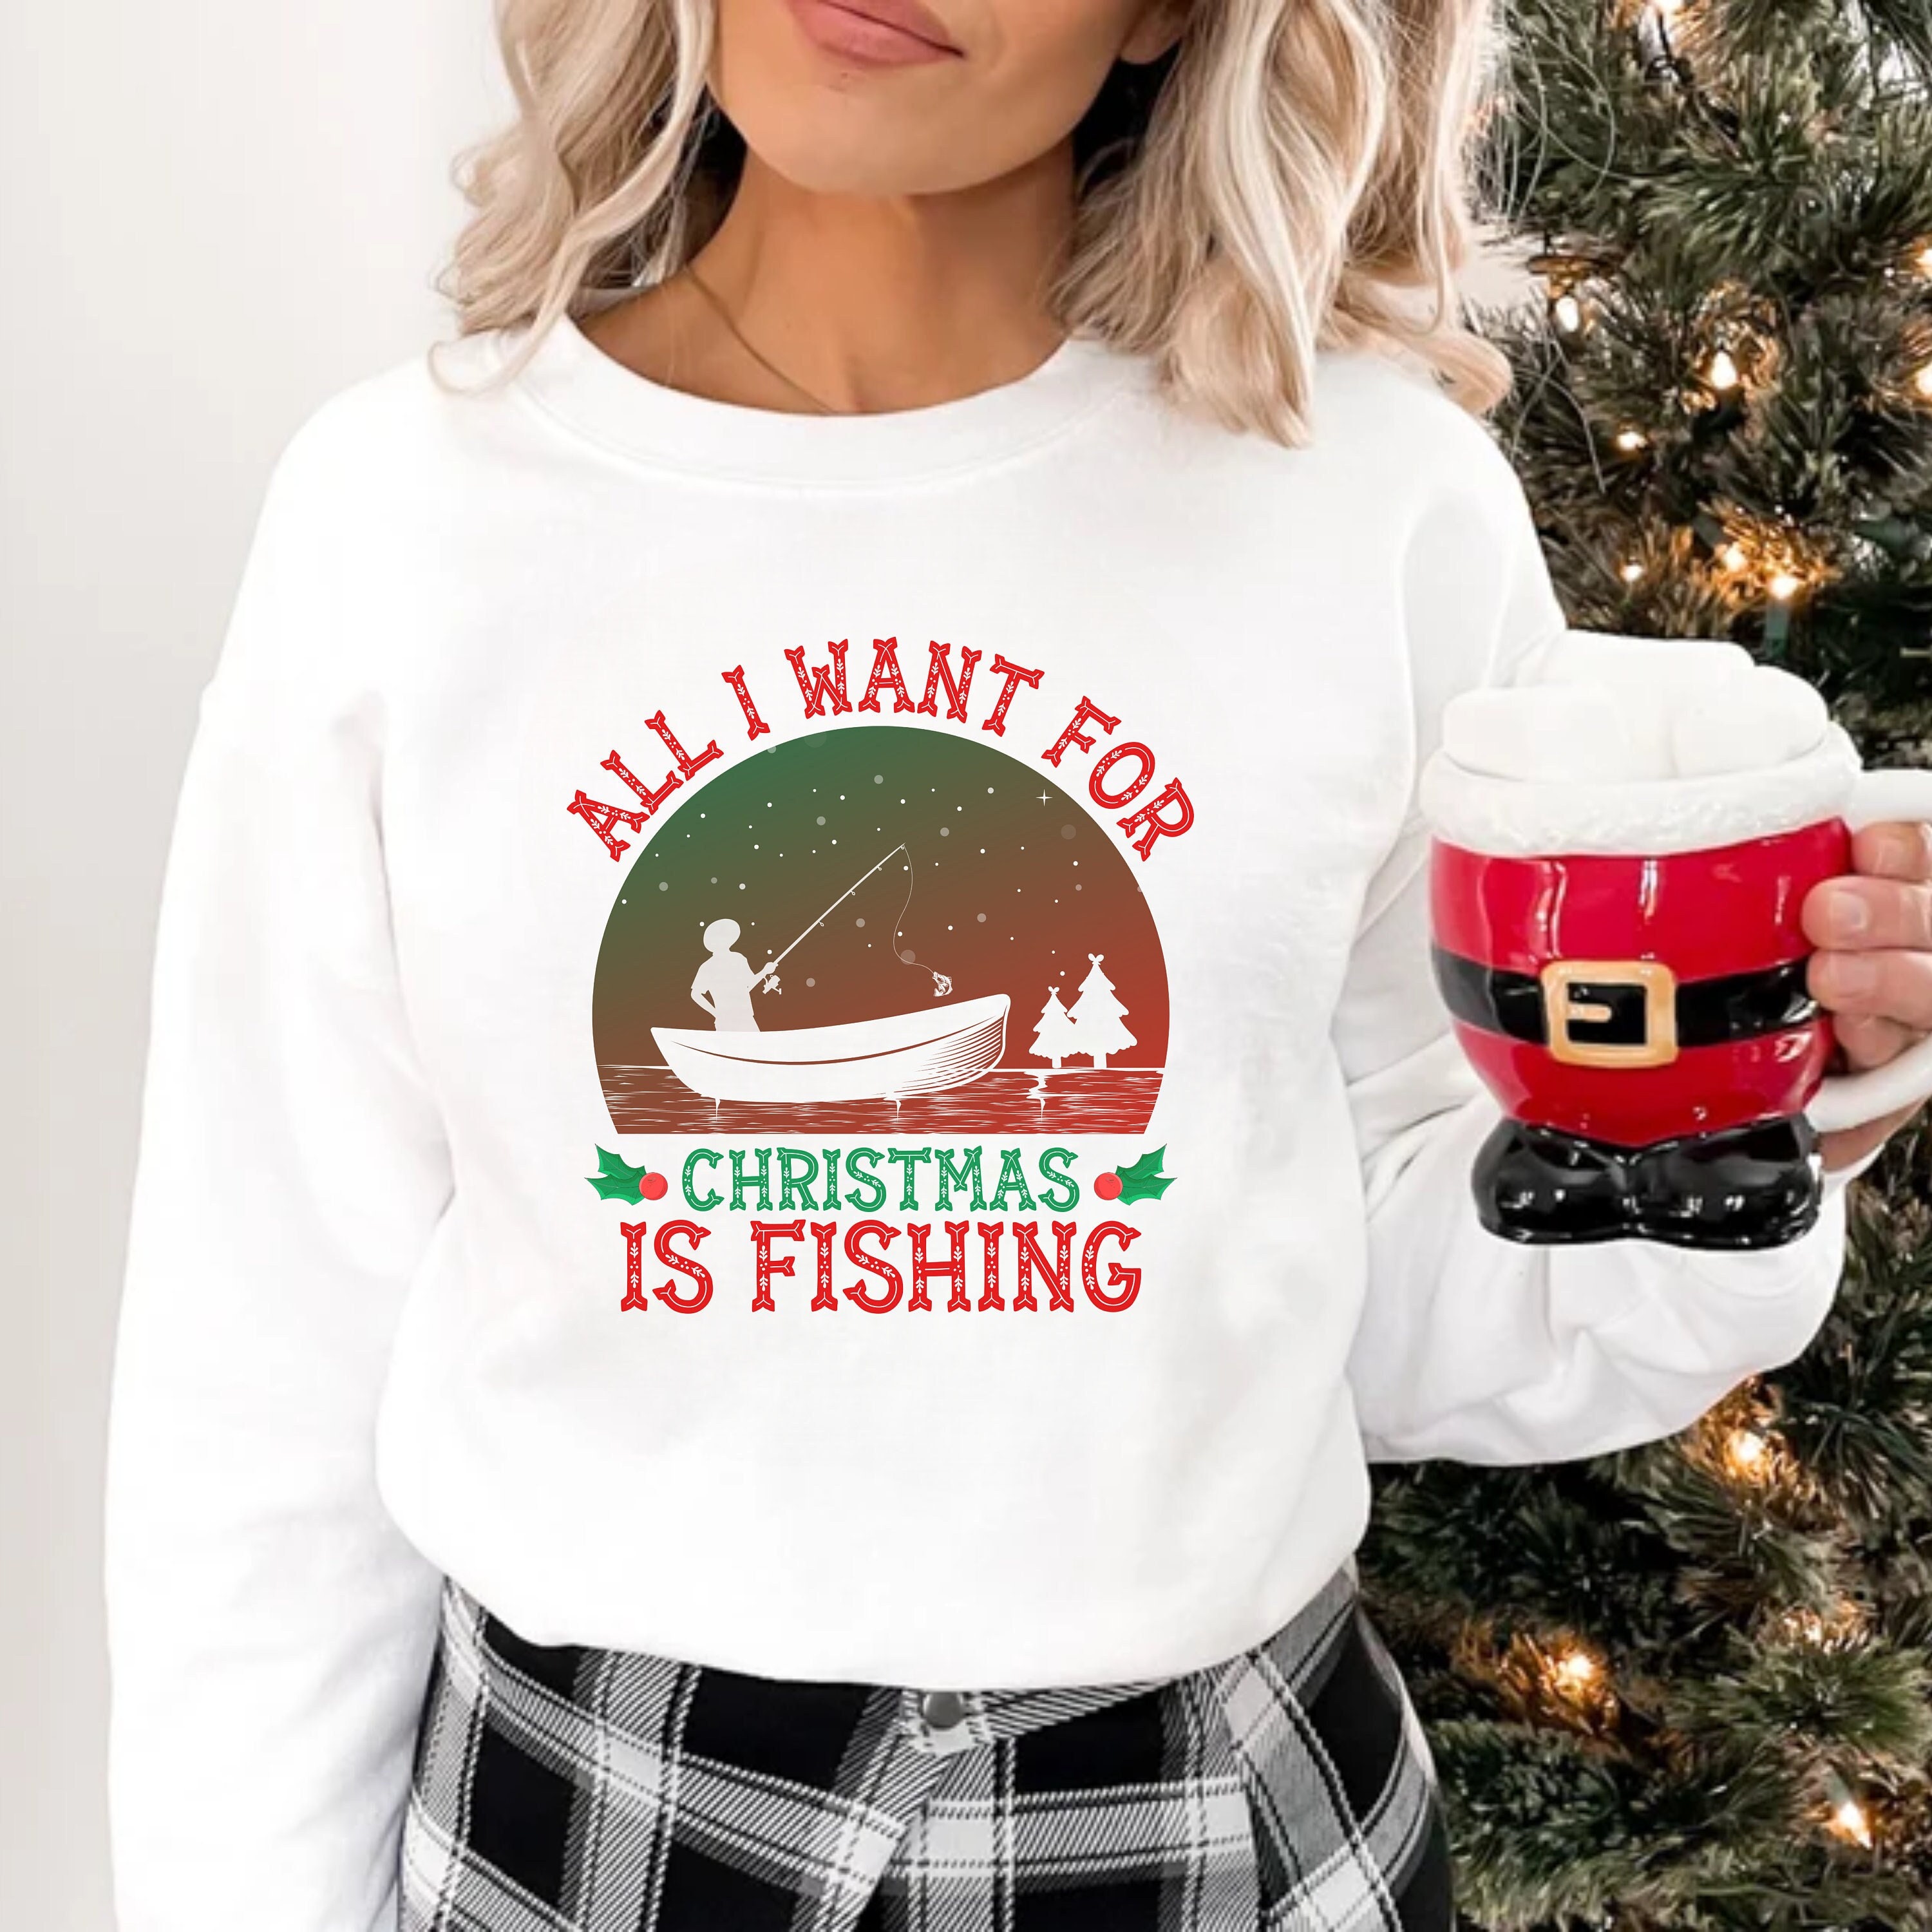 Fishing An Old Fisherman And The Best Catch Personalized Name Ugly  Christmas Sweaters - Banantees